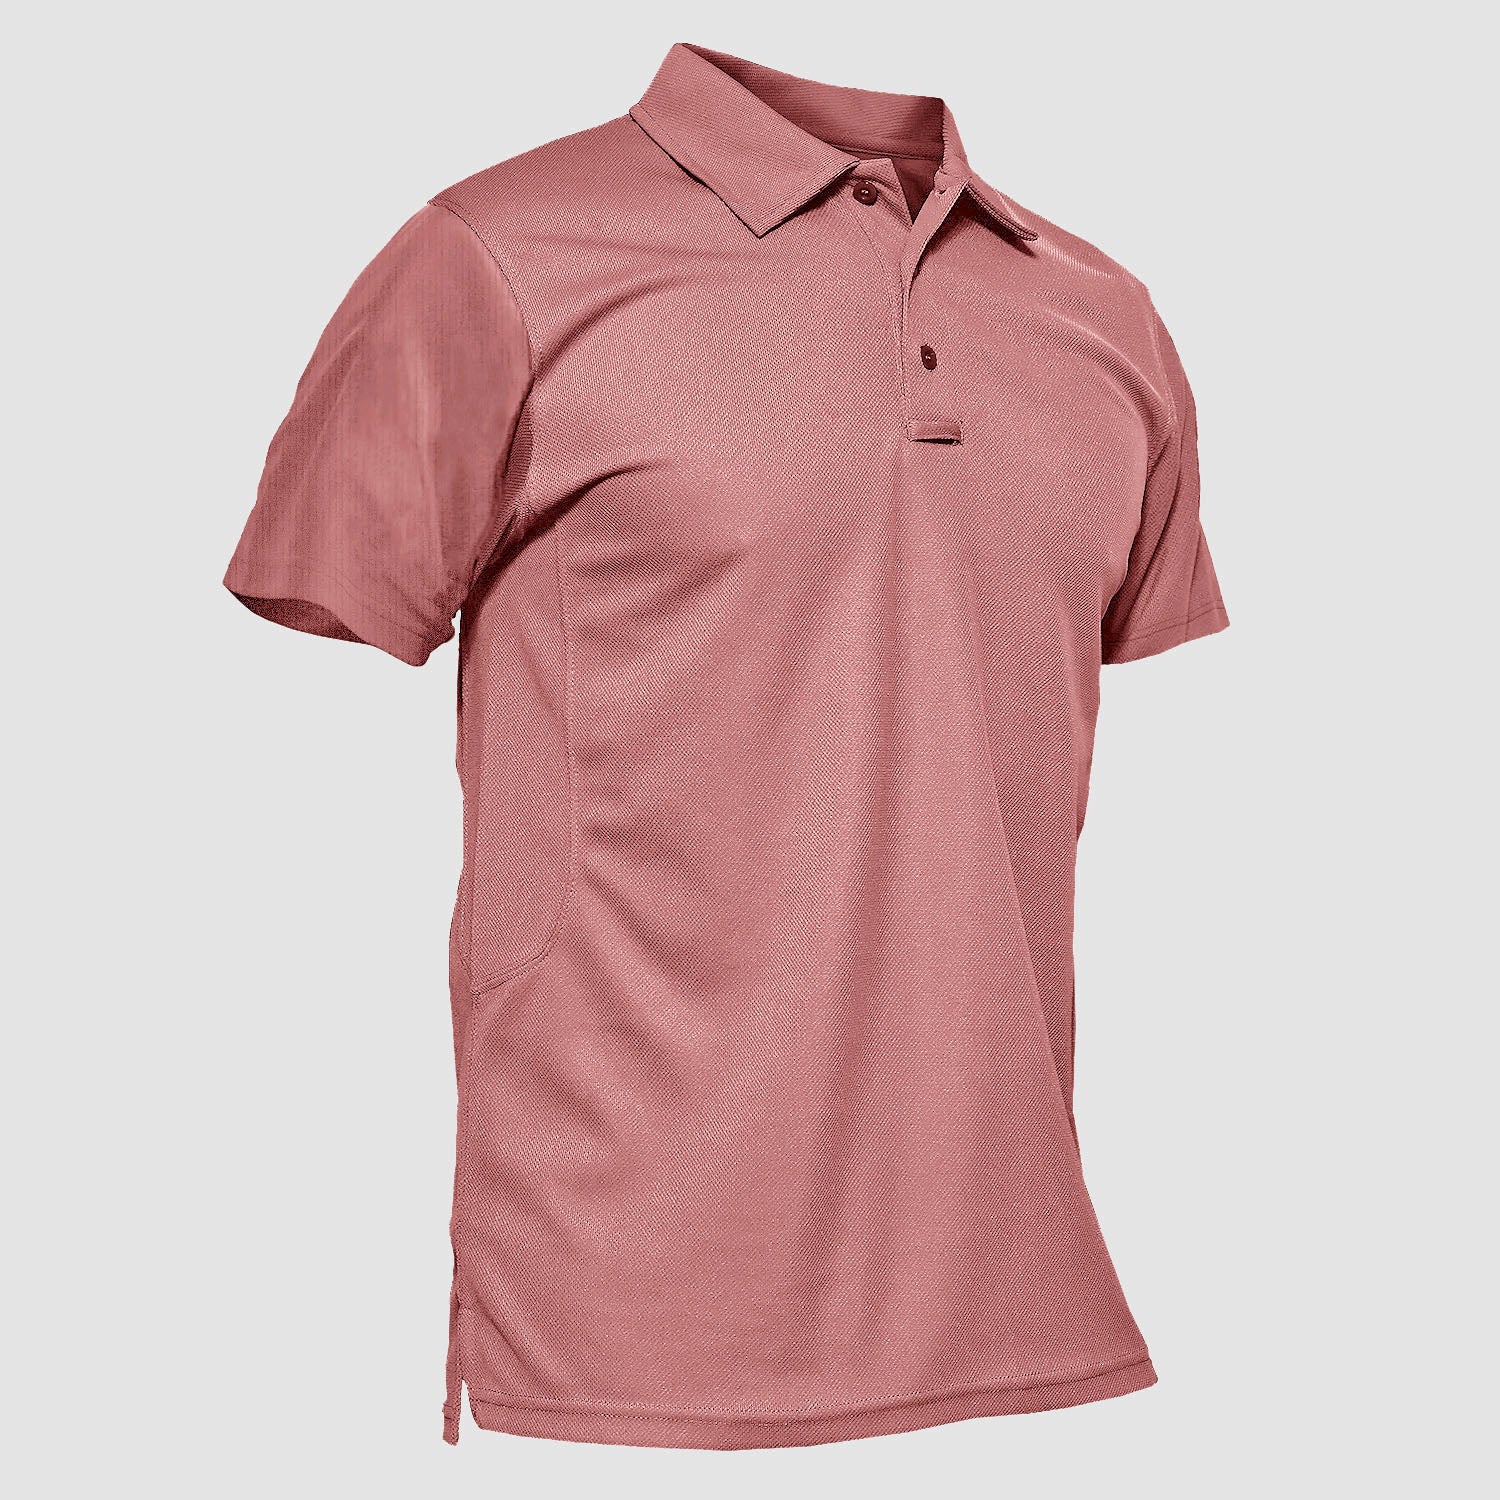 NQyIOS Polo Shirts for Men Quick Dry Fit Cool Short Sleeve Tactical Shirts  Casual Golf Tennis T-Shirts with Pocket Shirts for Men Sales Clearance Golf  Clothing for Men Tees Black - ShopStyle